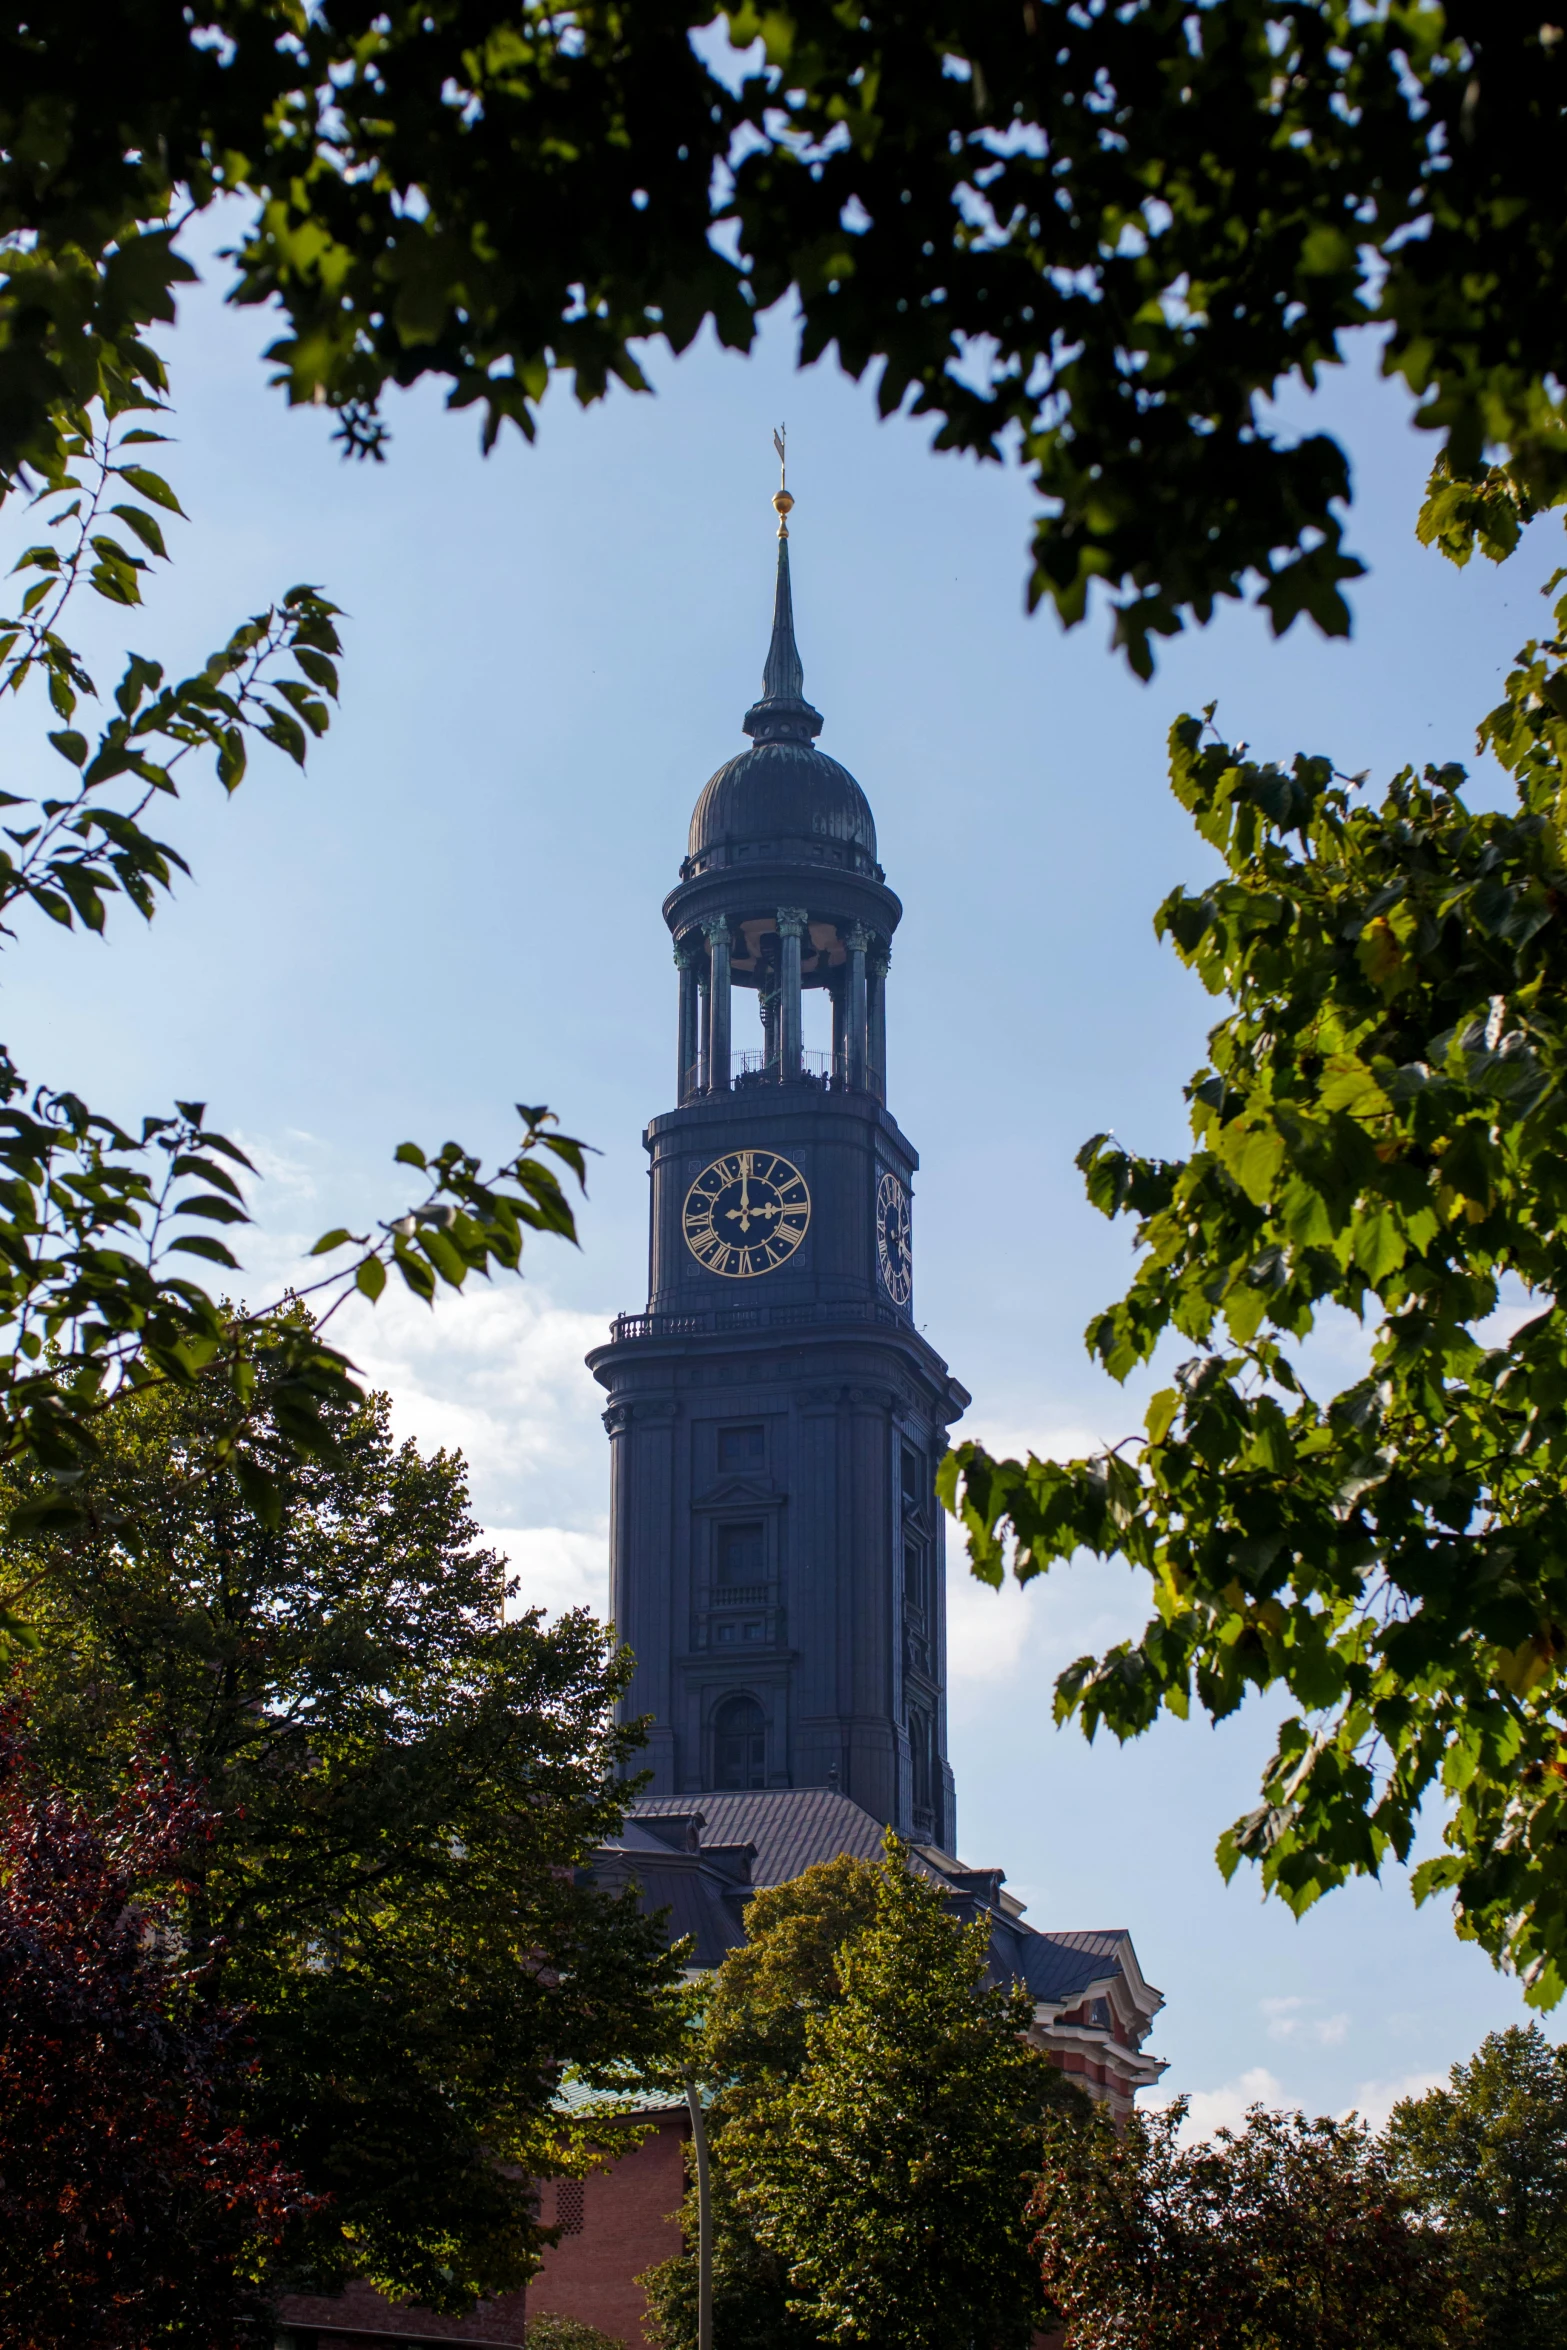 a clock that is on the side of a building, inspired by Abraham van den Tempel, heidelberg school, neoclassical tower with dome, with dark trees in foreground, lead - covered spire, taken in the early 2020s